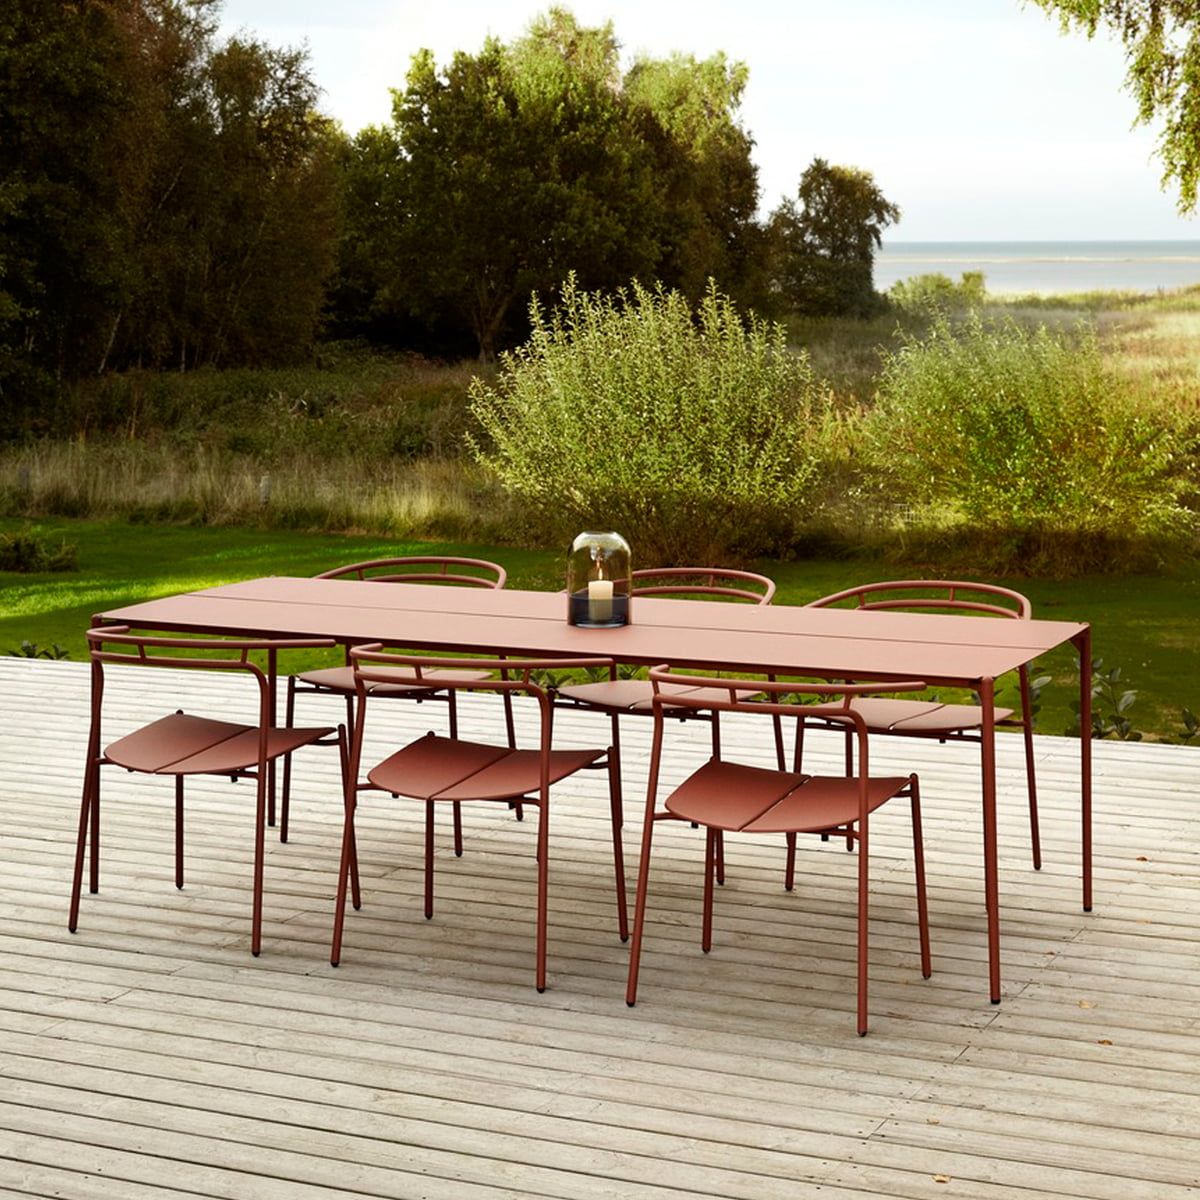 Decorate your house with stylish outdoor
furniture sets